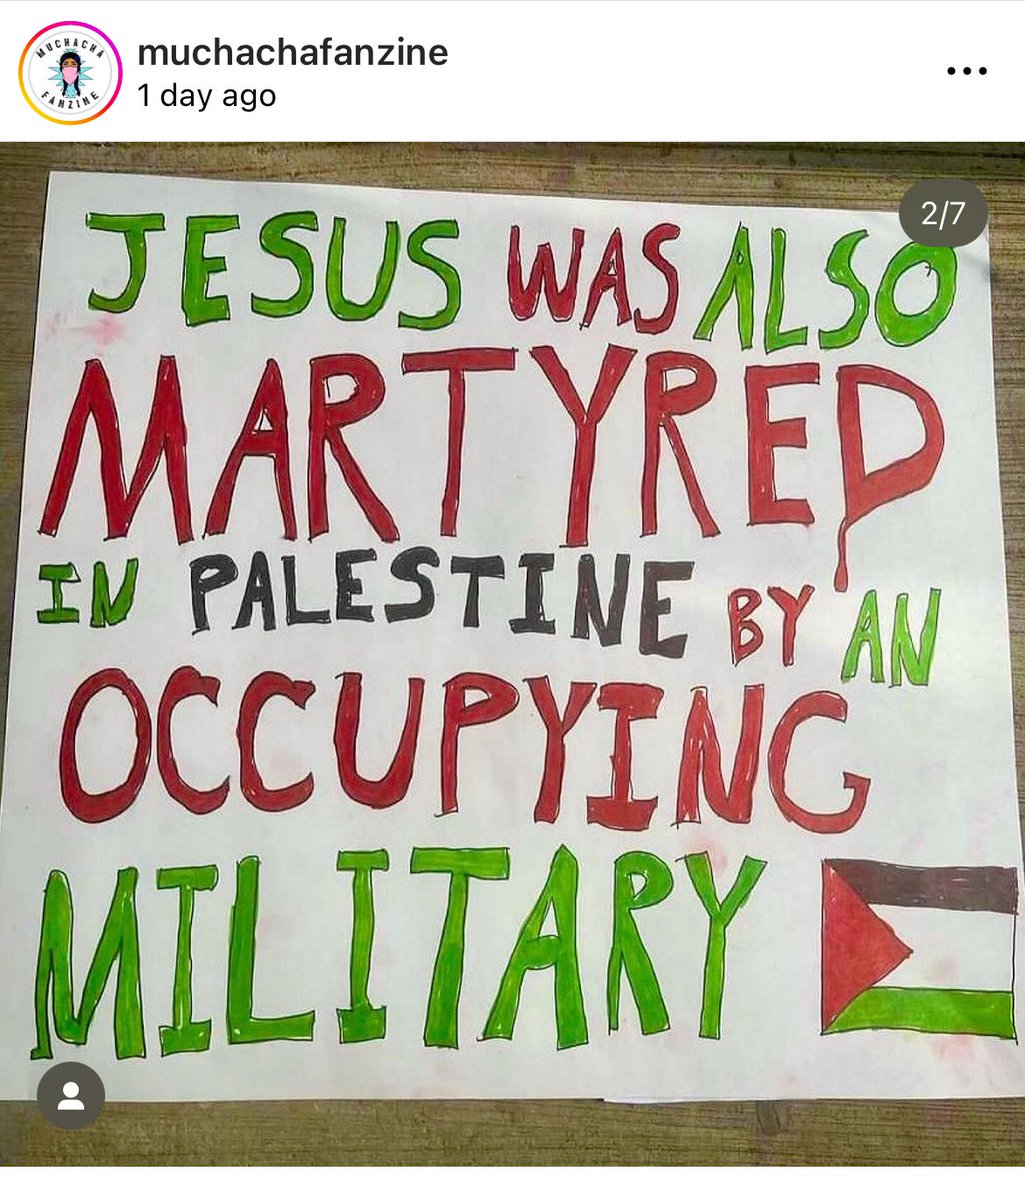 The funny thing about this is that the occupying military (Romans) are the ones who renamed Judea to Syria-Palestina after crushing the Jewish revolts in 70CE and 135CE. To intentionally erase Jewish sovereignty in our homeland by naming it after the extinct philistines, enemies.